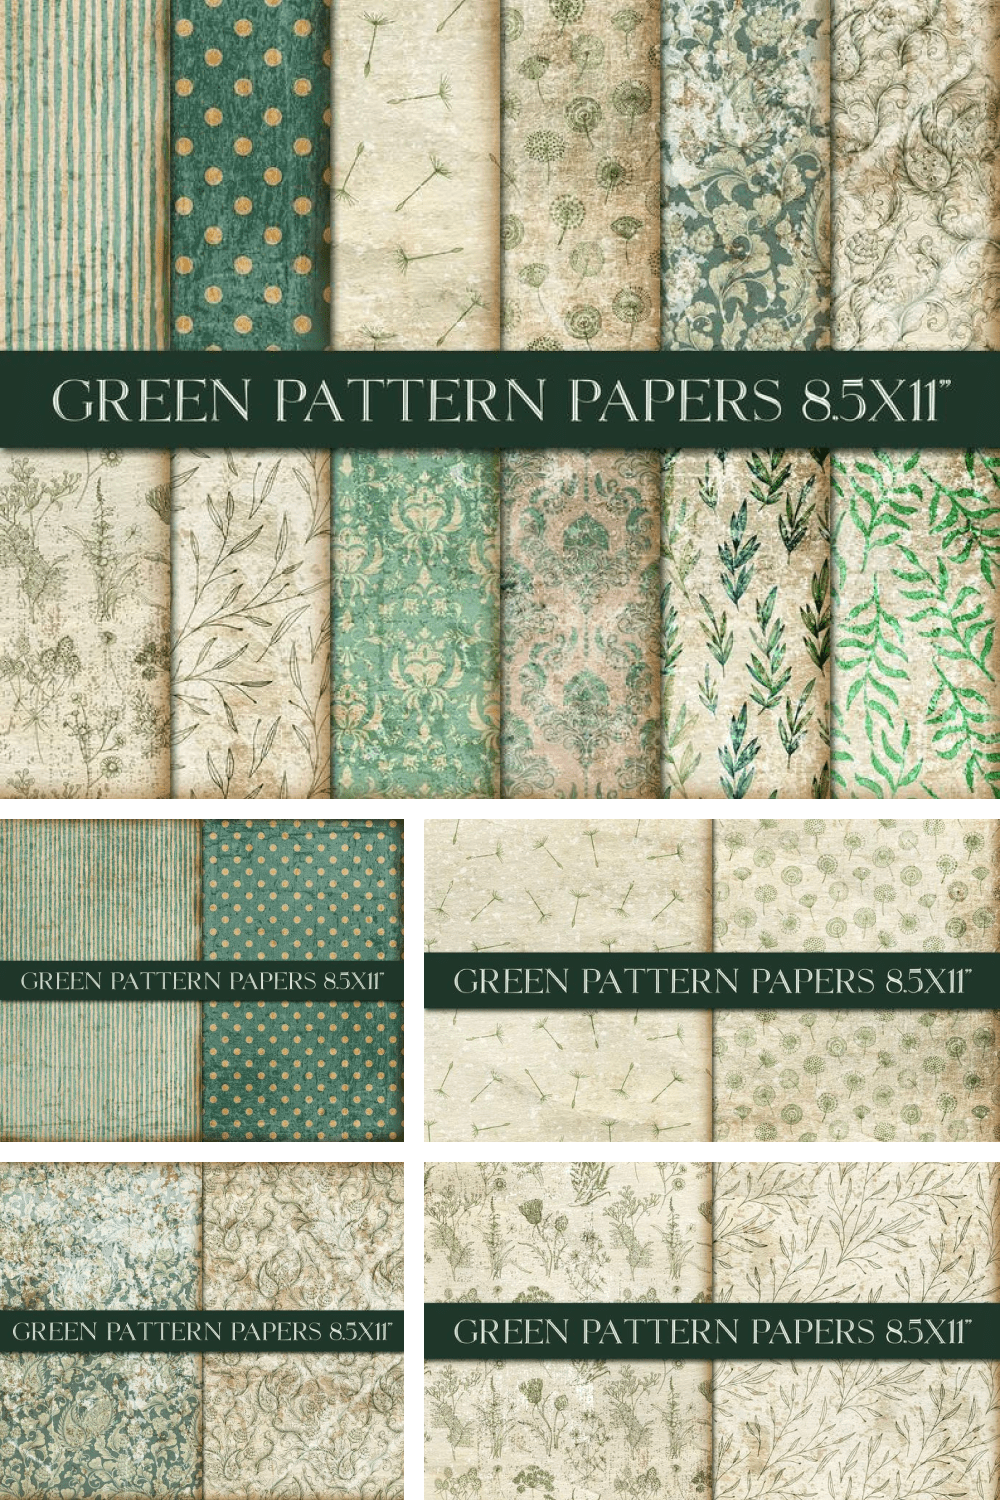 Luxury green paper like a royal wallpapers.